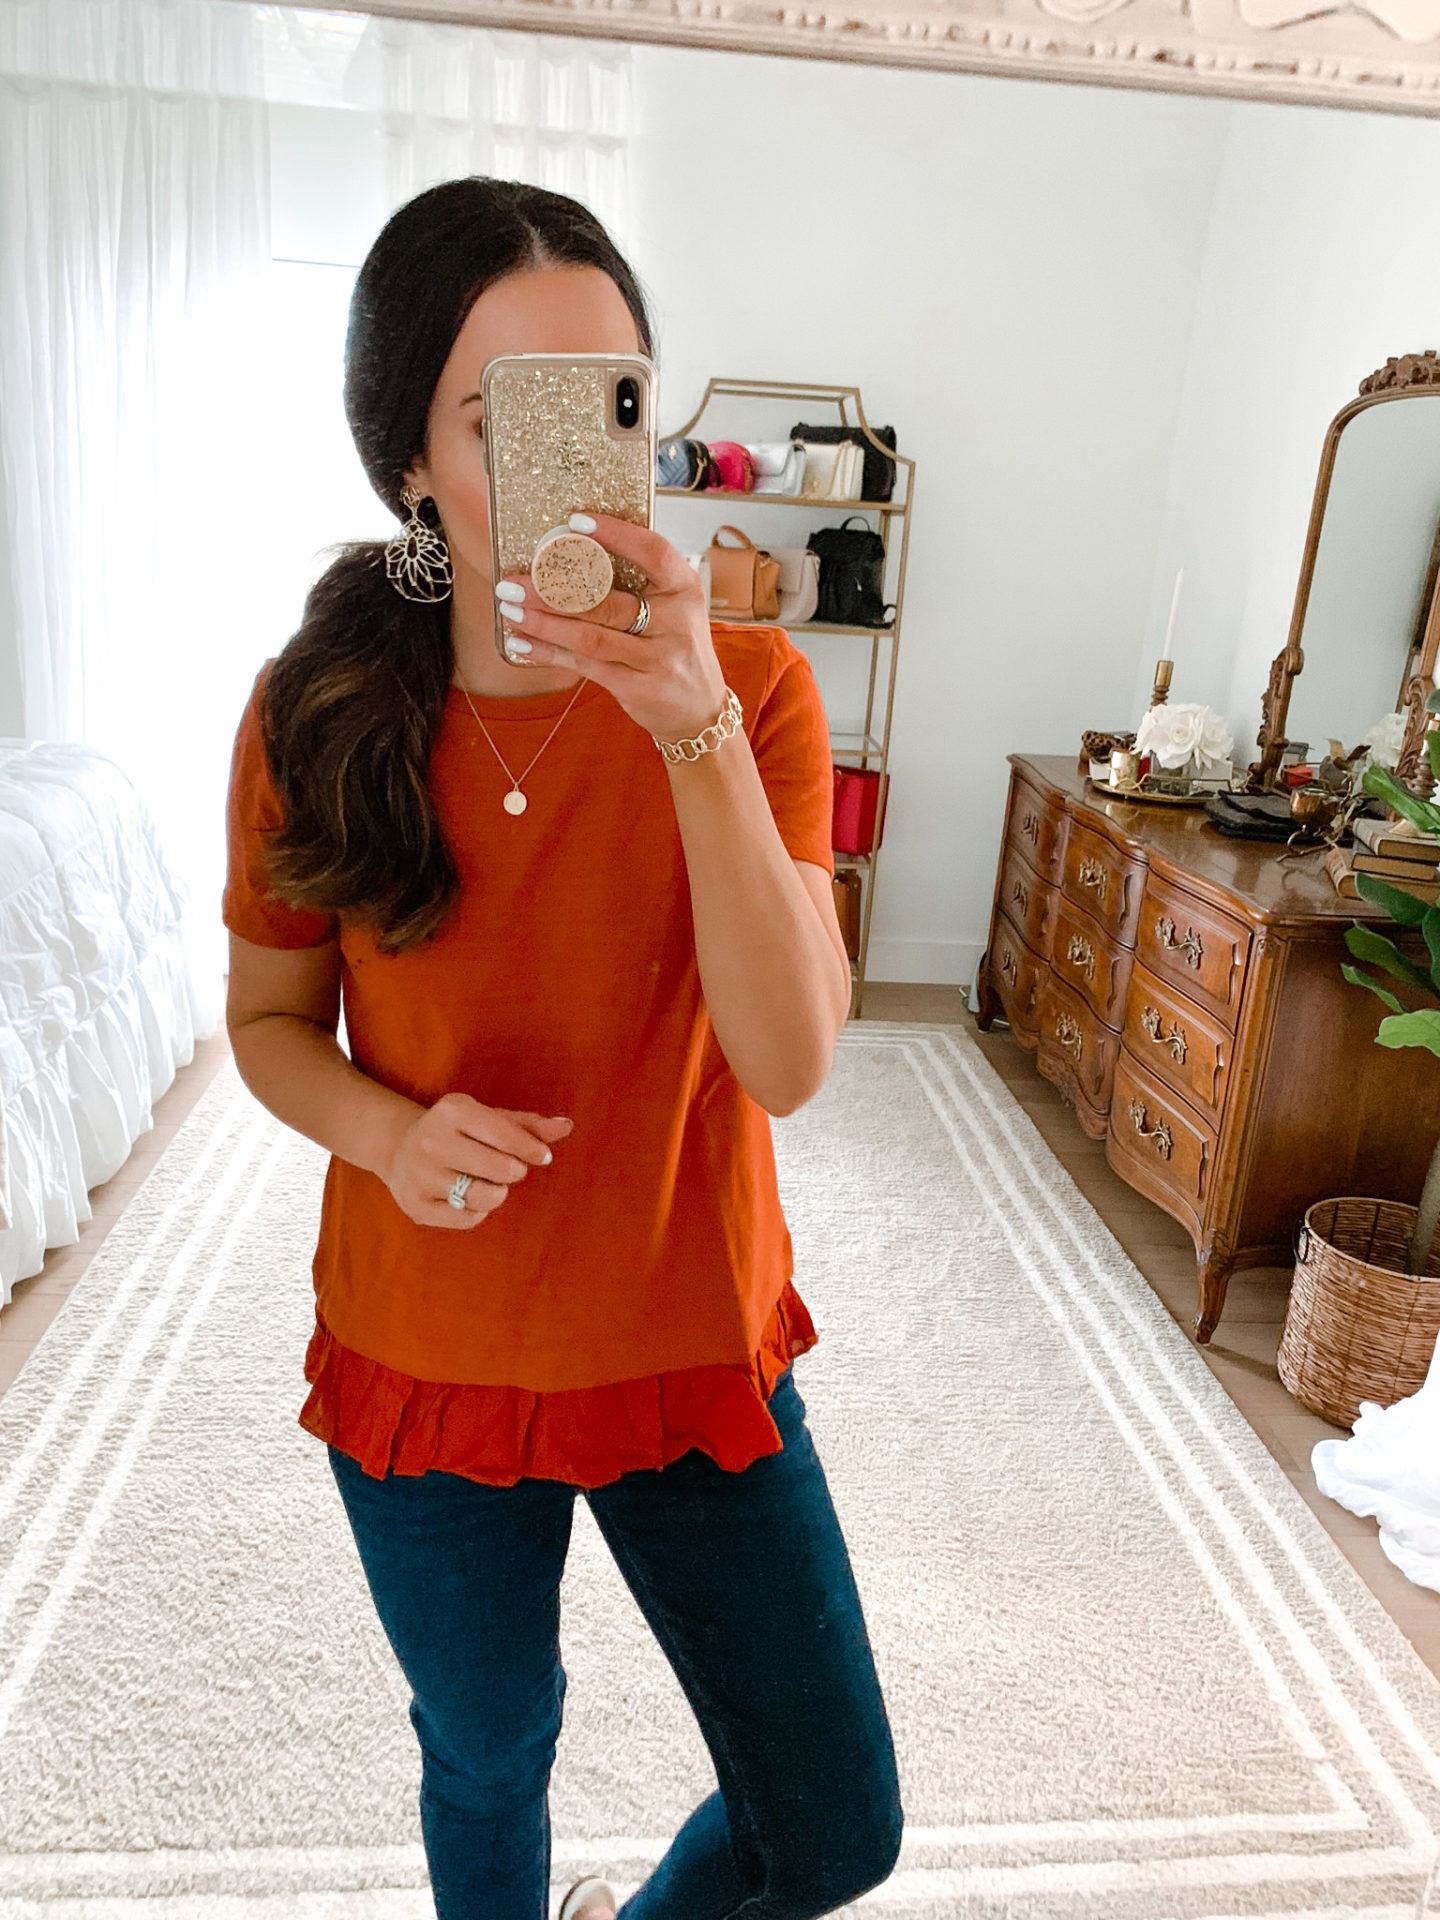 LOFT 40% Off New Arrivals Try On + Giveaway! - The Double Take Girls